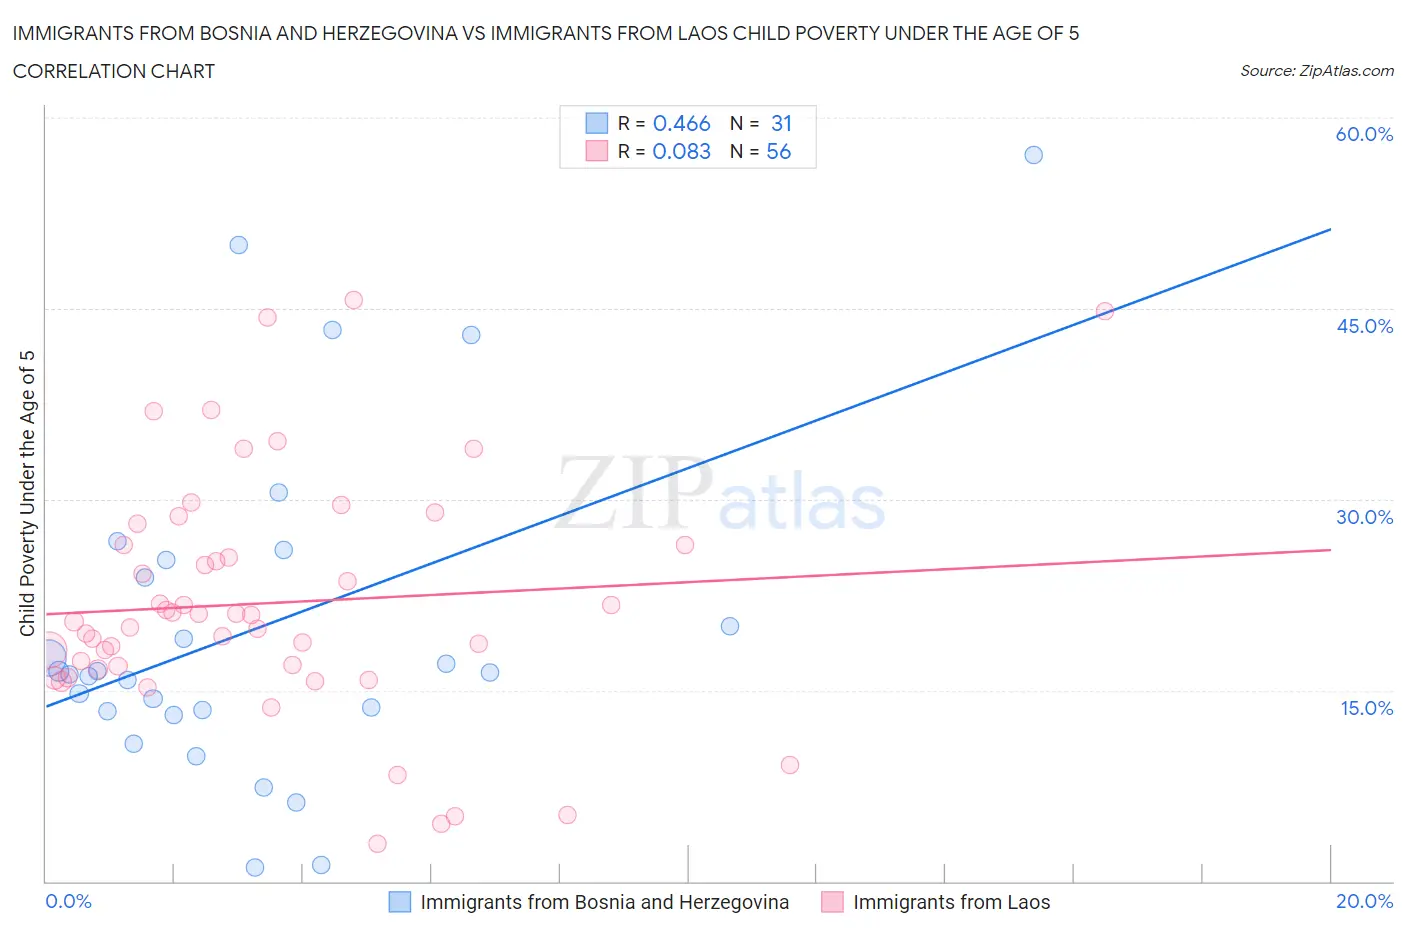 Immigrants from Bosnia and Herzegovina vs Immigrants from Laos Child Poverty Under the Age of 5